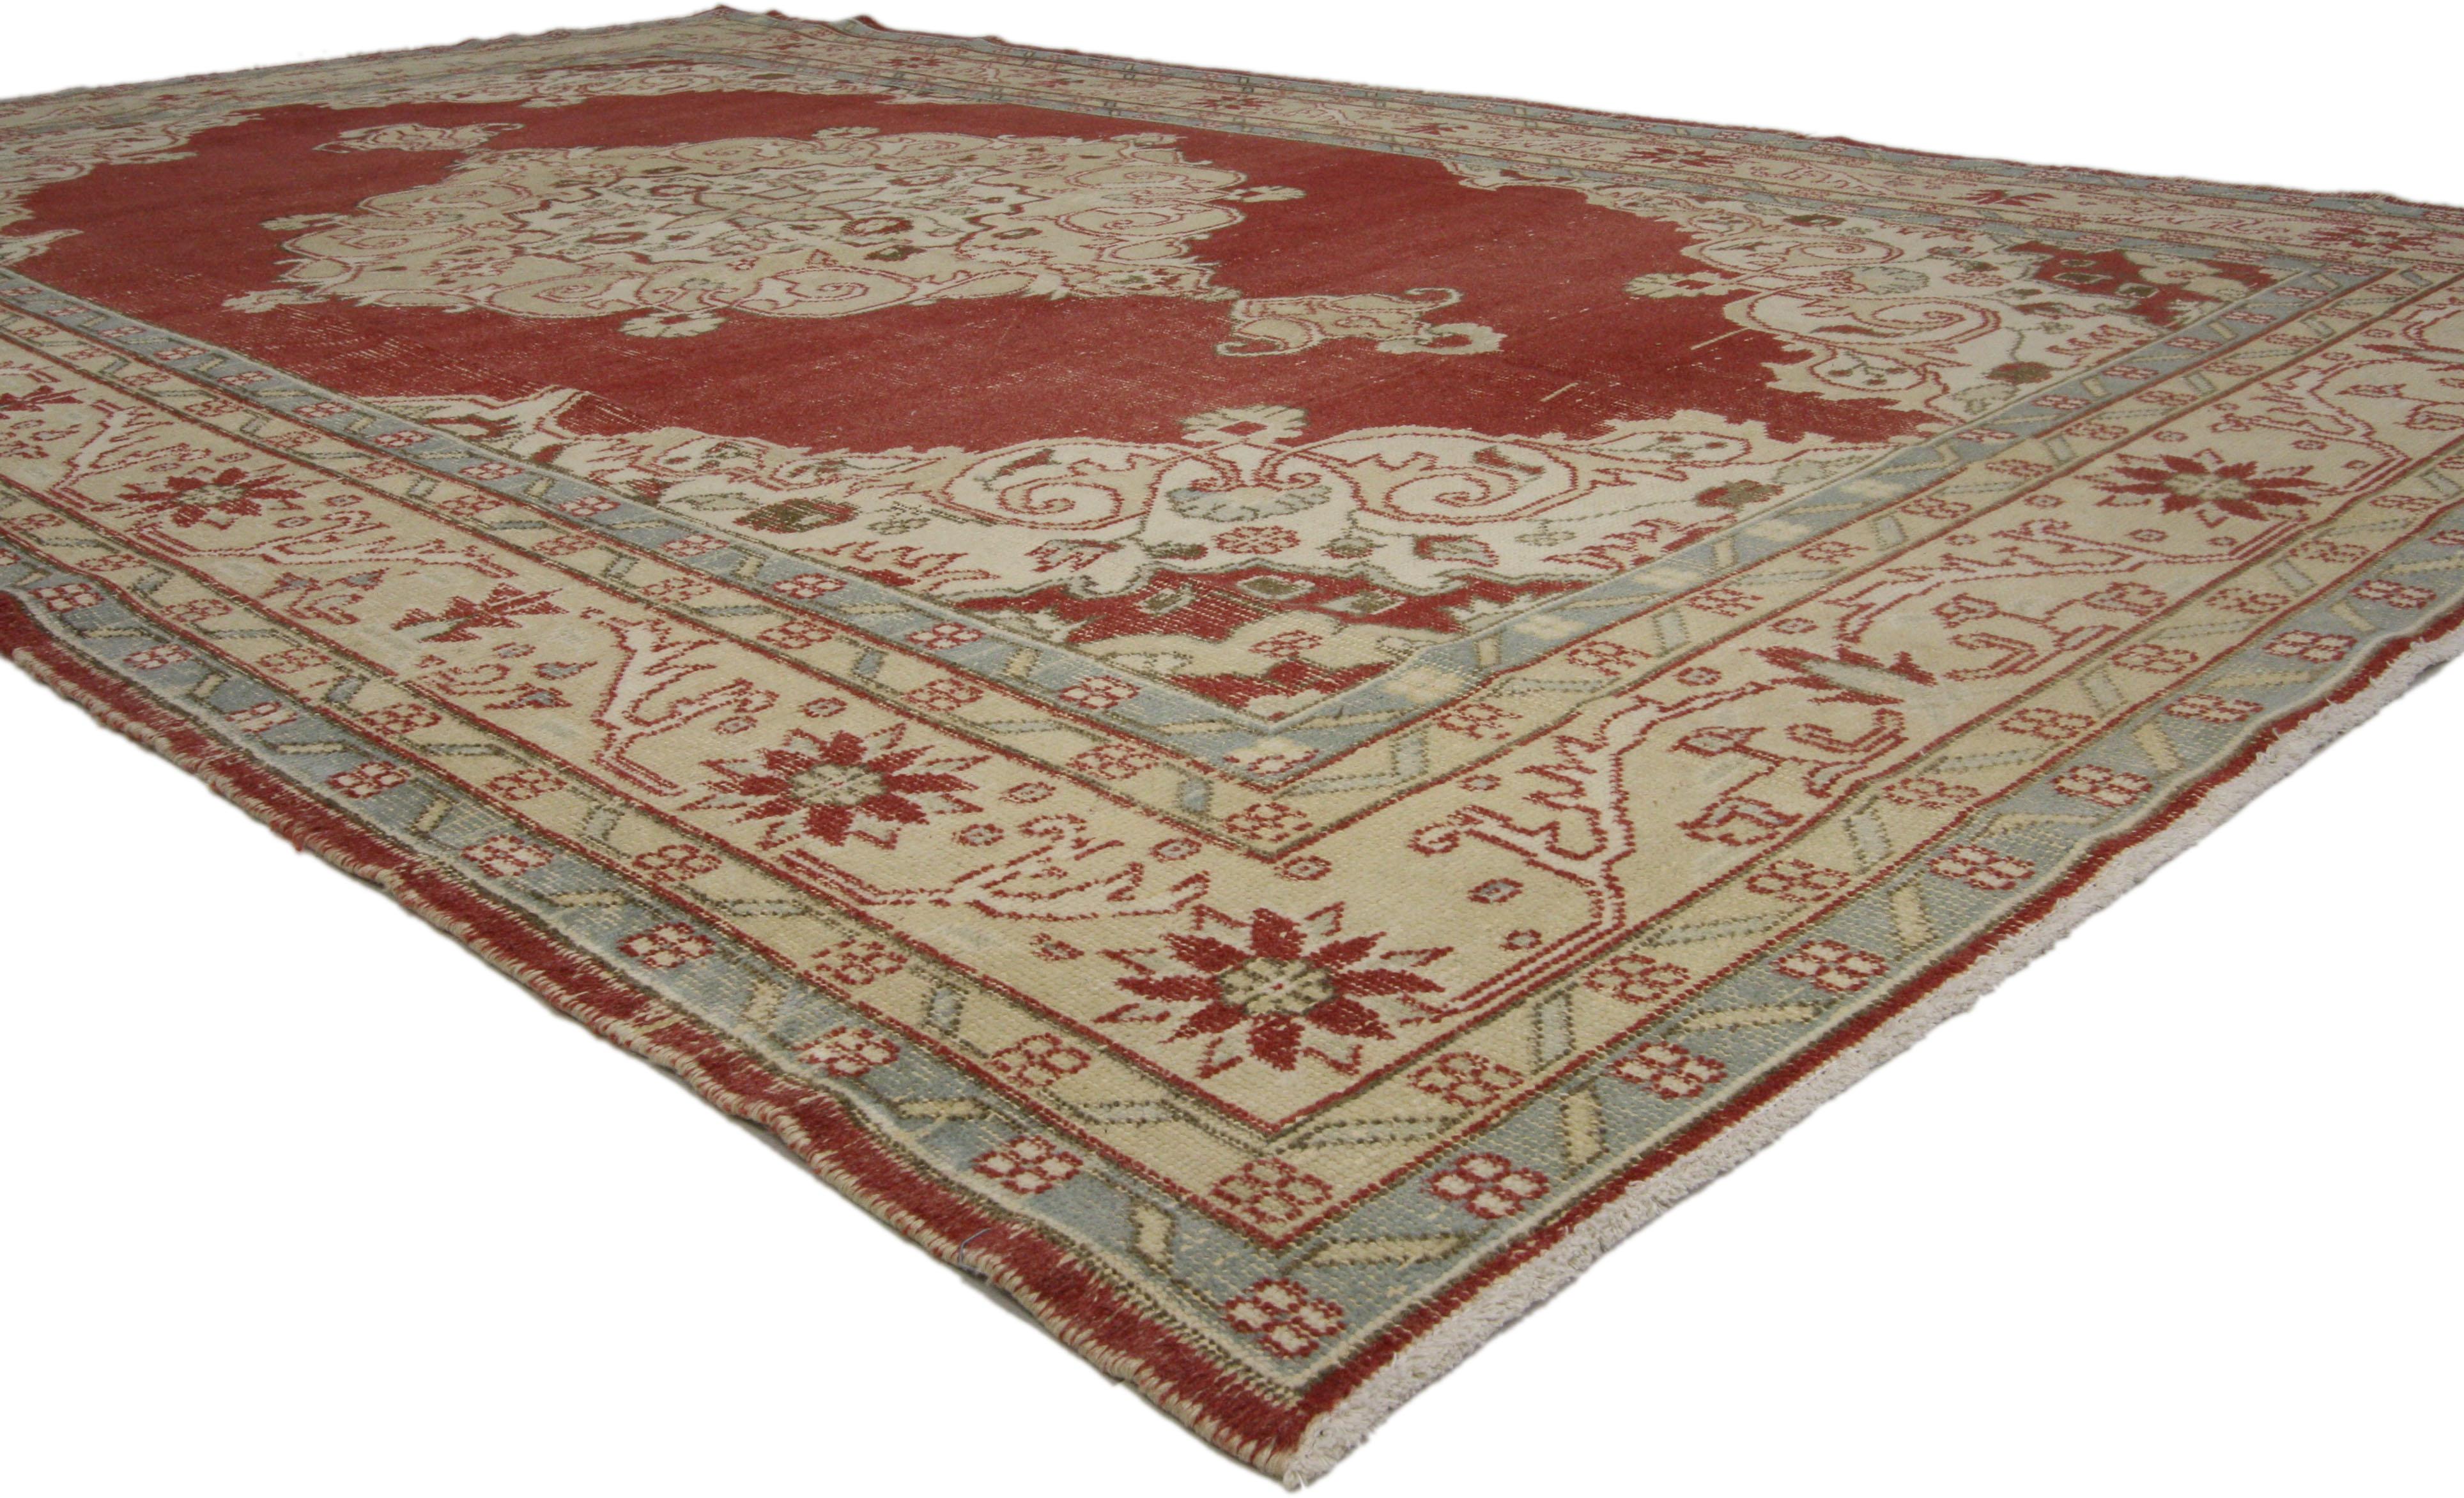 51539, rustic style distressed vintage Turkish Sivas Area rug. This hand knotted wool distressed vintage Turkish Sivas rug features a scalloped diamond-shaped medallion with palmette pendants floating in the center of an abrashed brick red field.